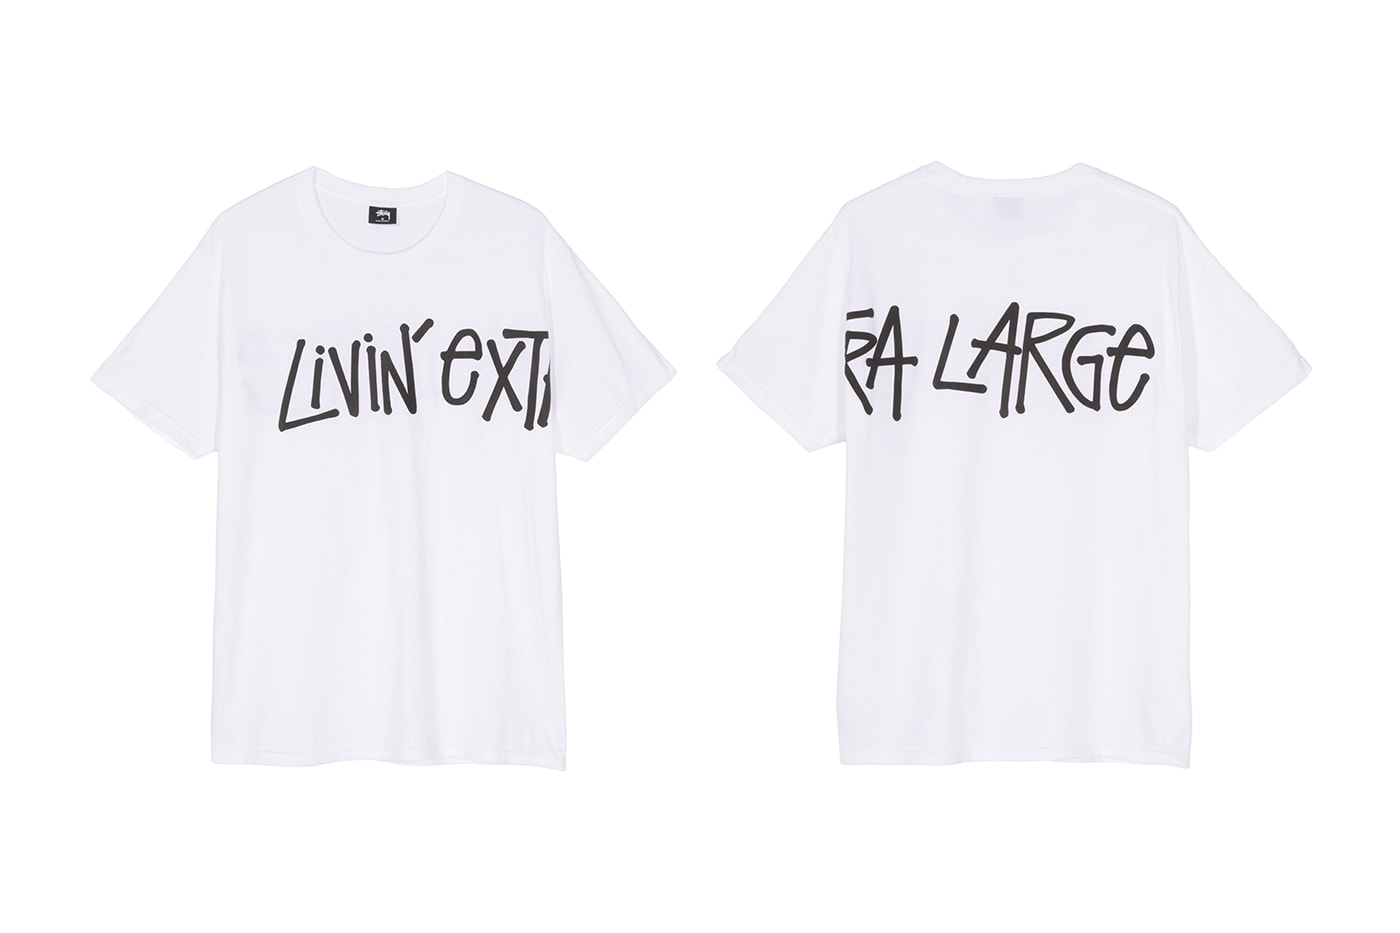 Stussy LIVIN EXTRA LARGE T shirt billboards california desert white black tee motto broadcast blue skies highway campaign project initiative